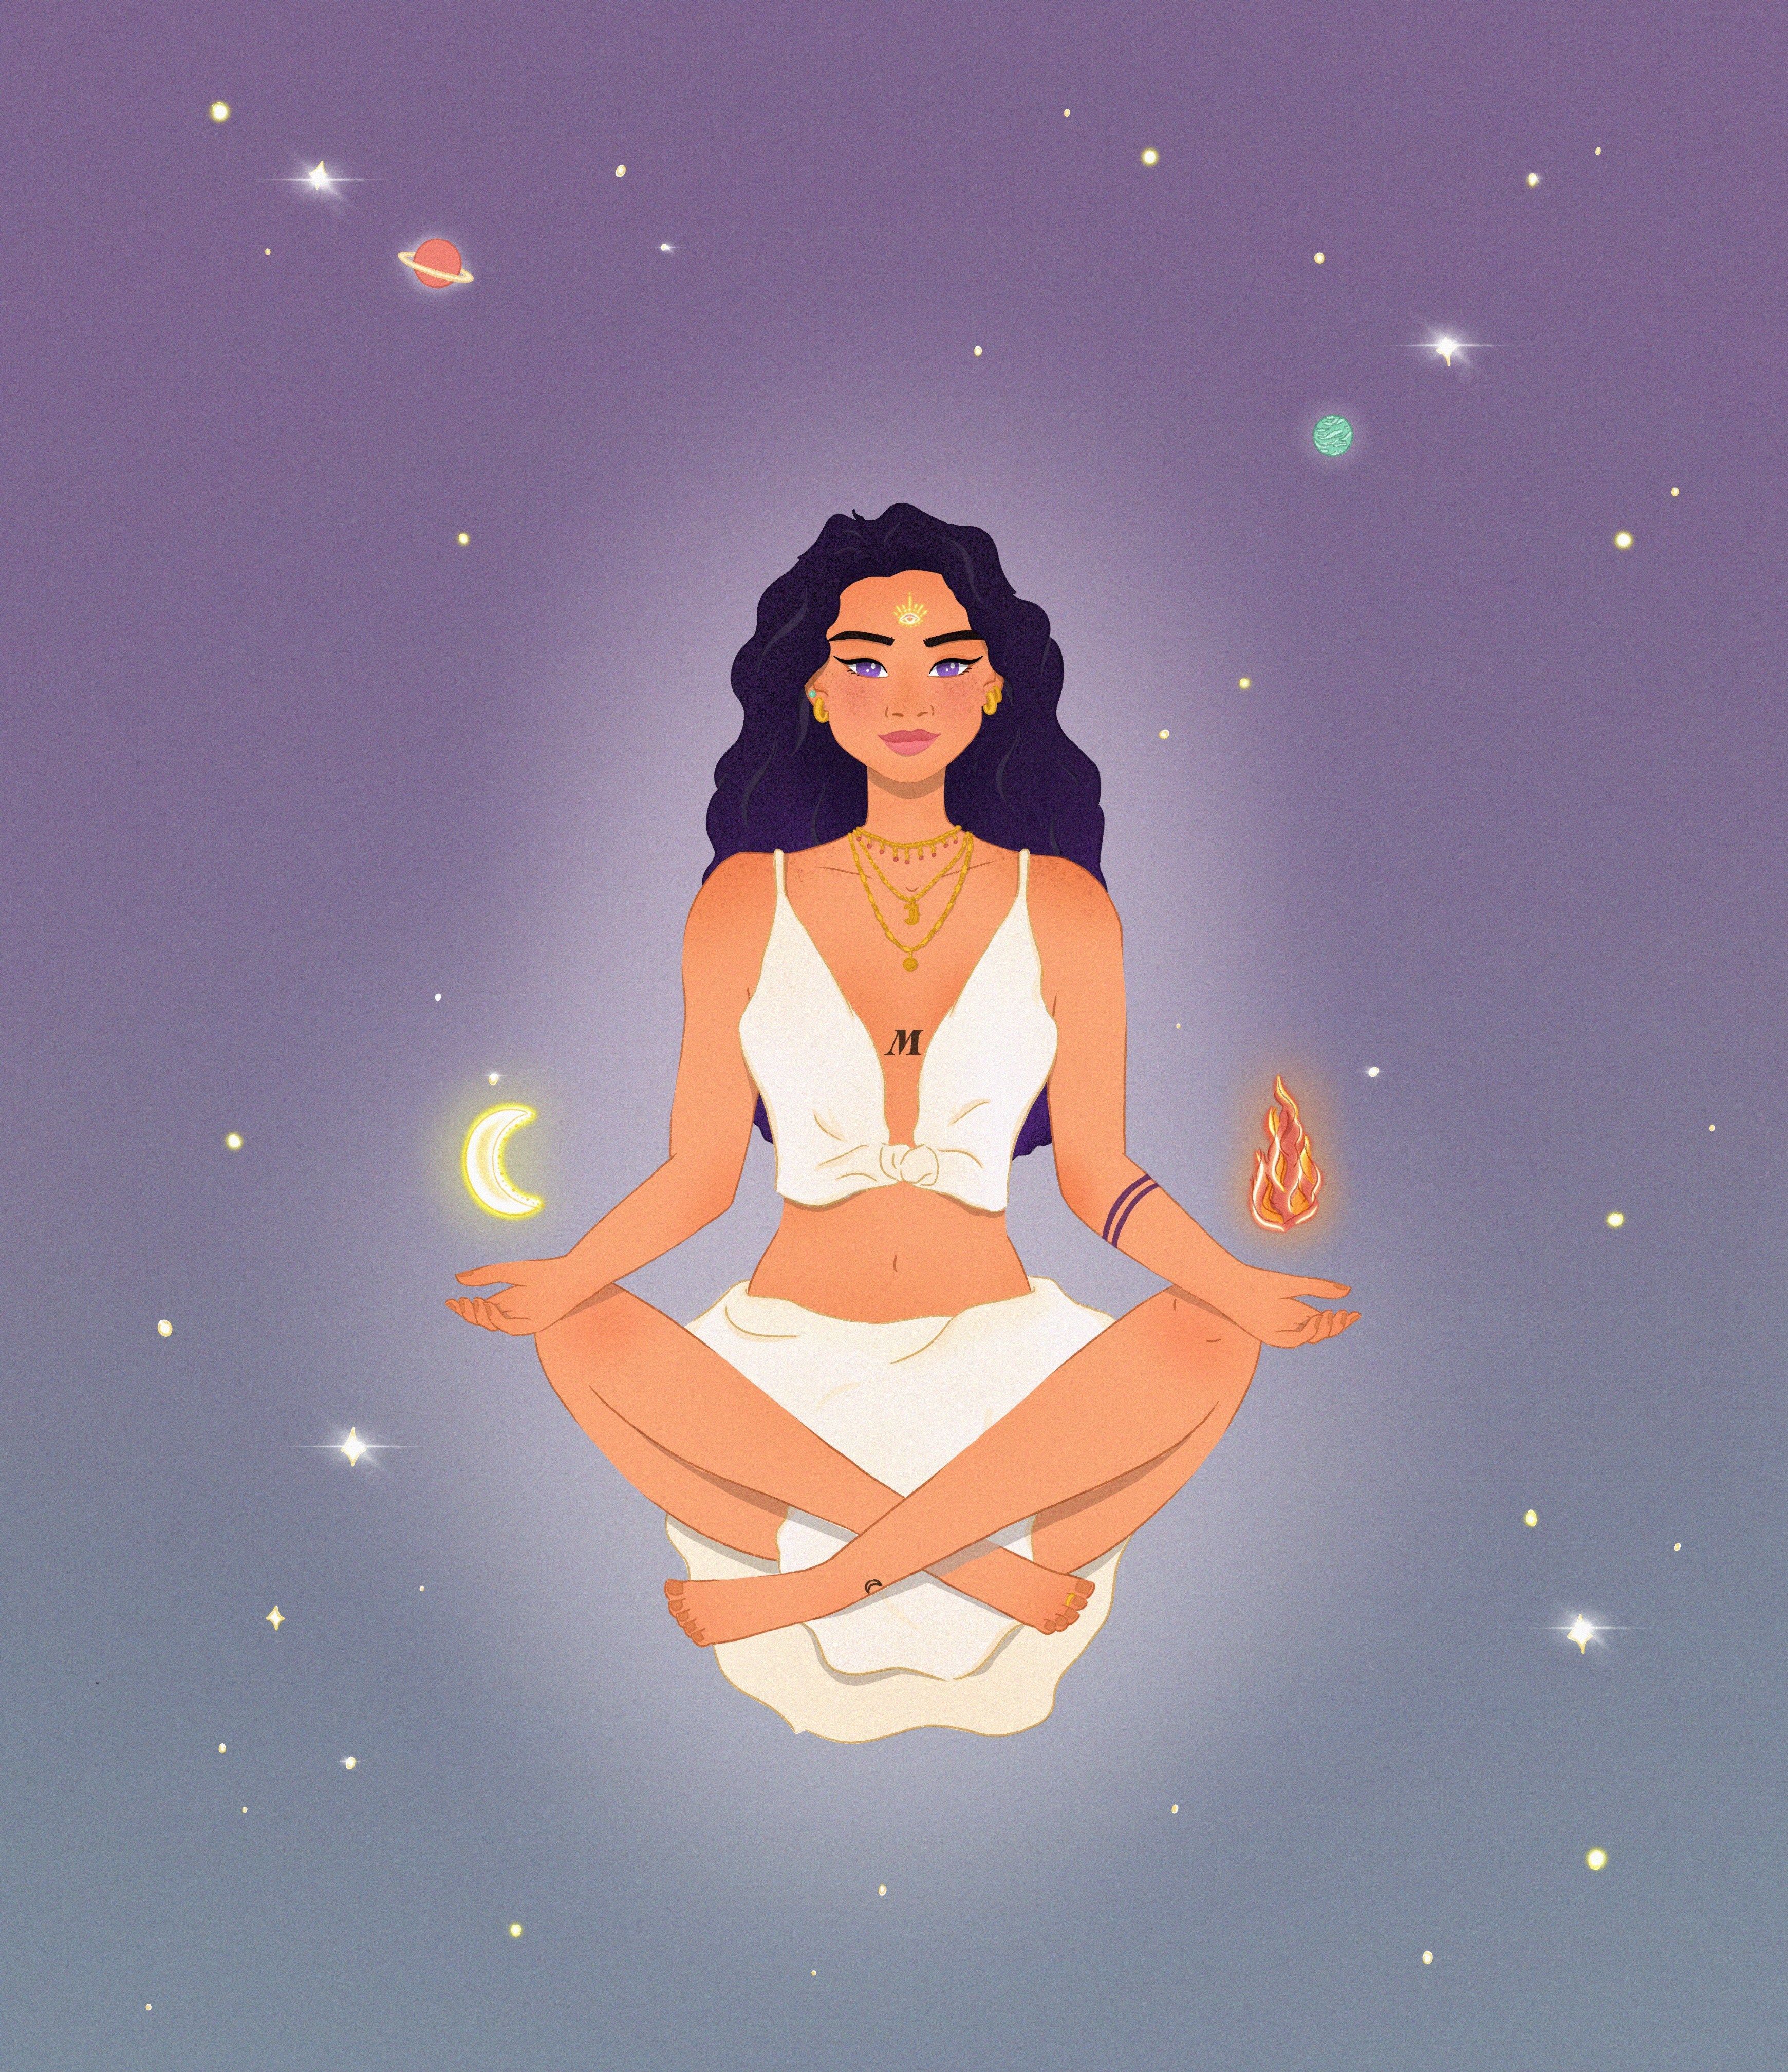 A woman in meditation with stars and planets around her - Spiritual